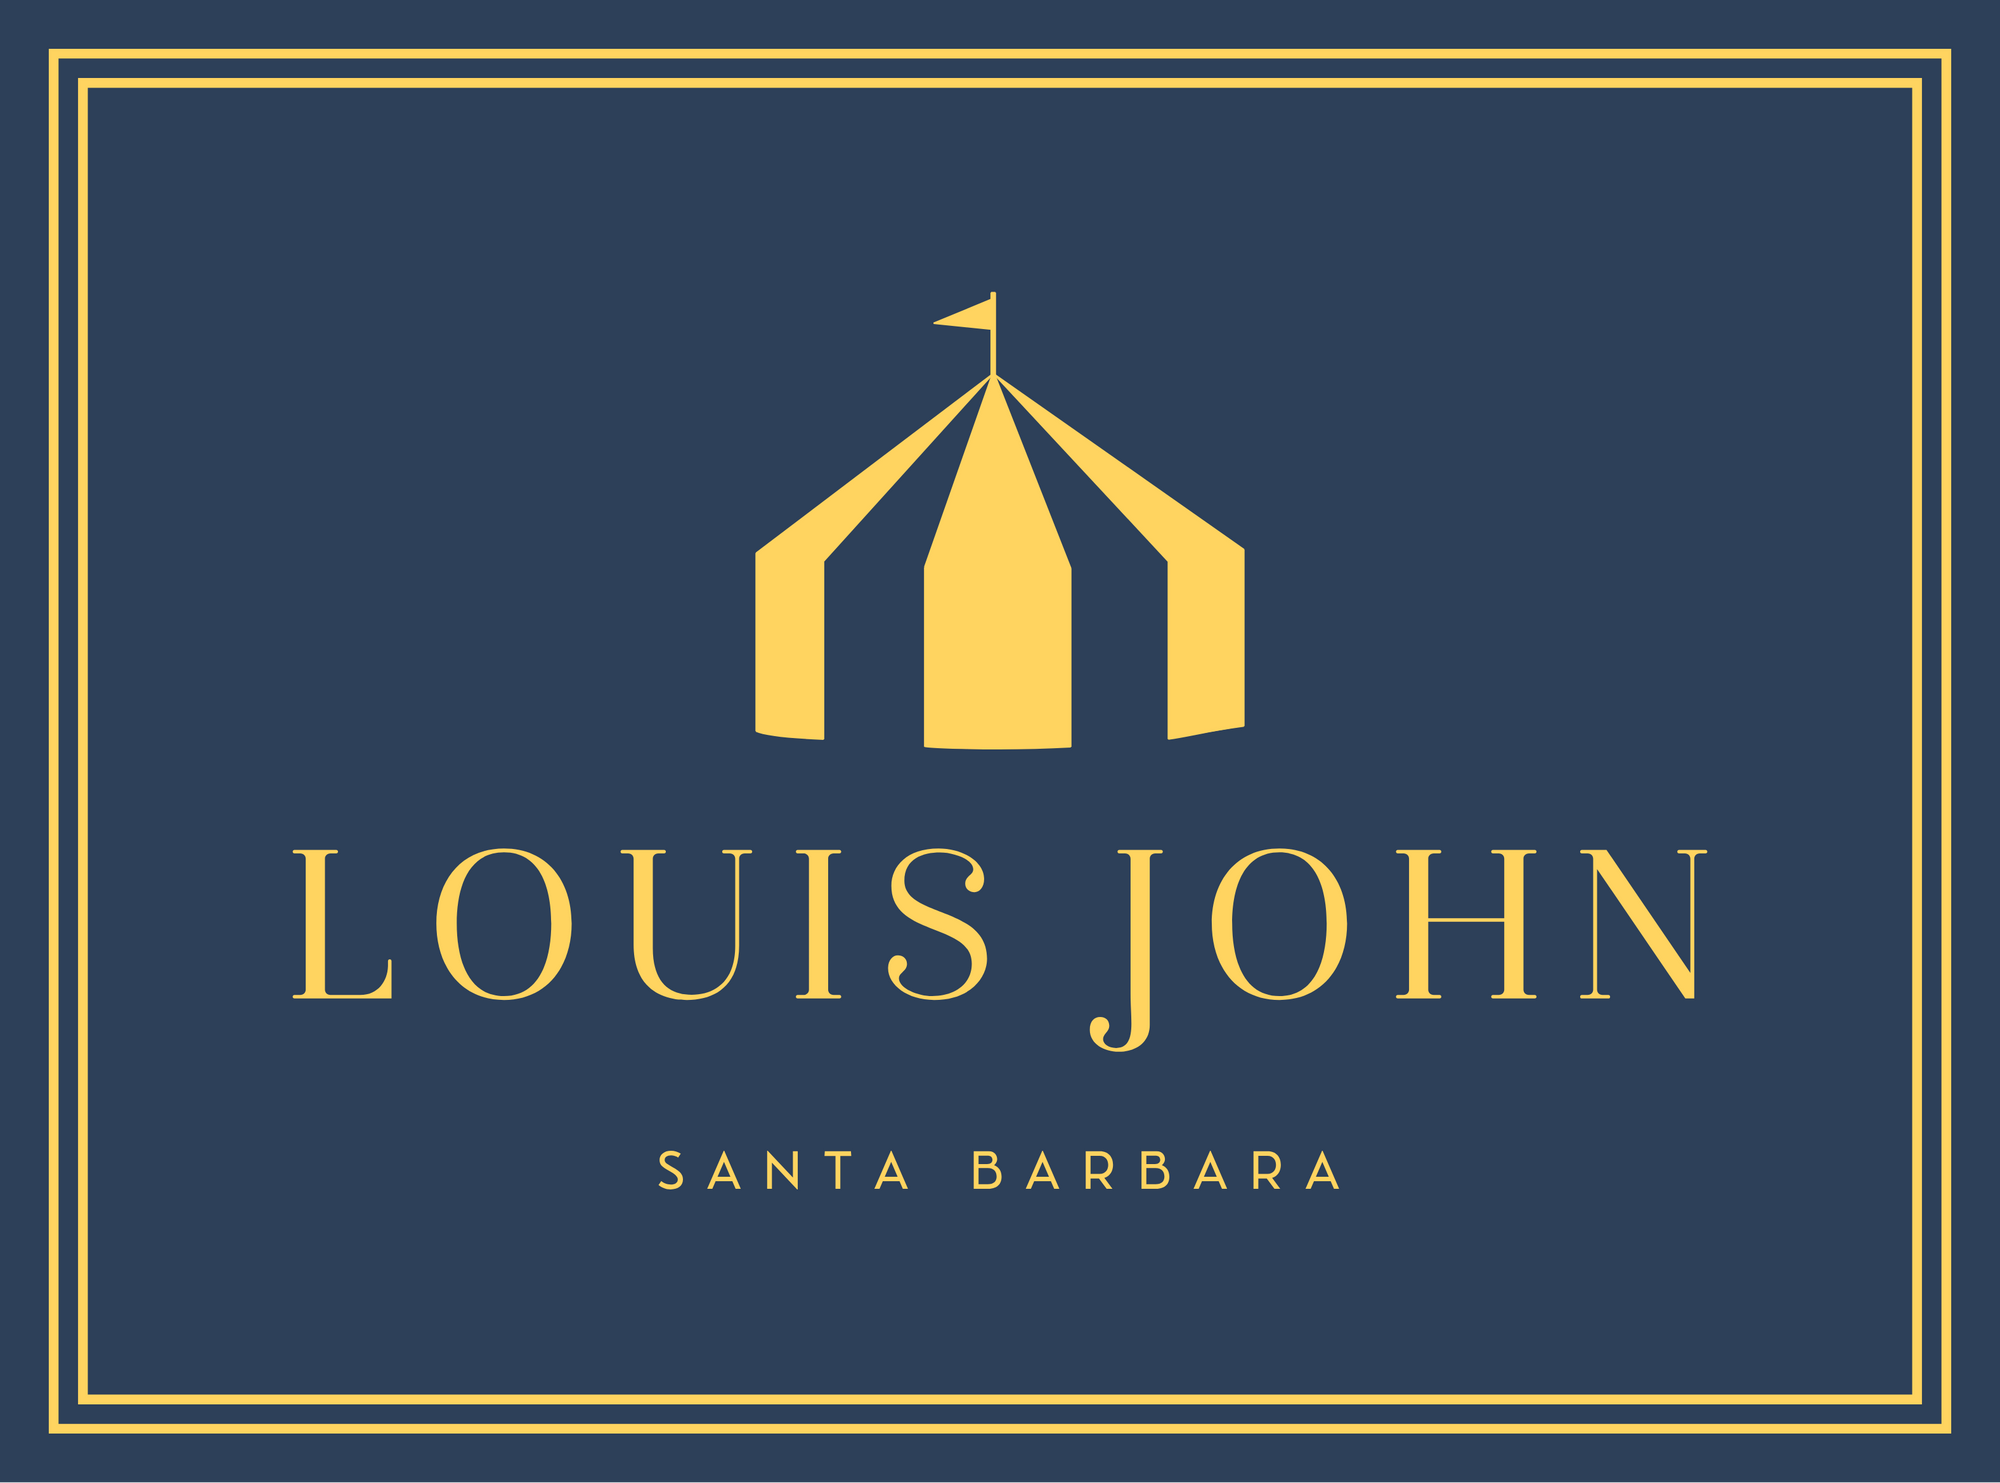 Visit our fashion section of the store filled with specialty items such as clothing, accessories, handbags and more! Come by and see new items Louis has in store!